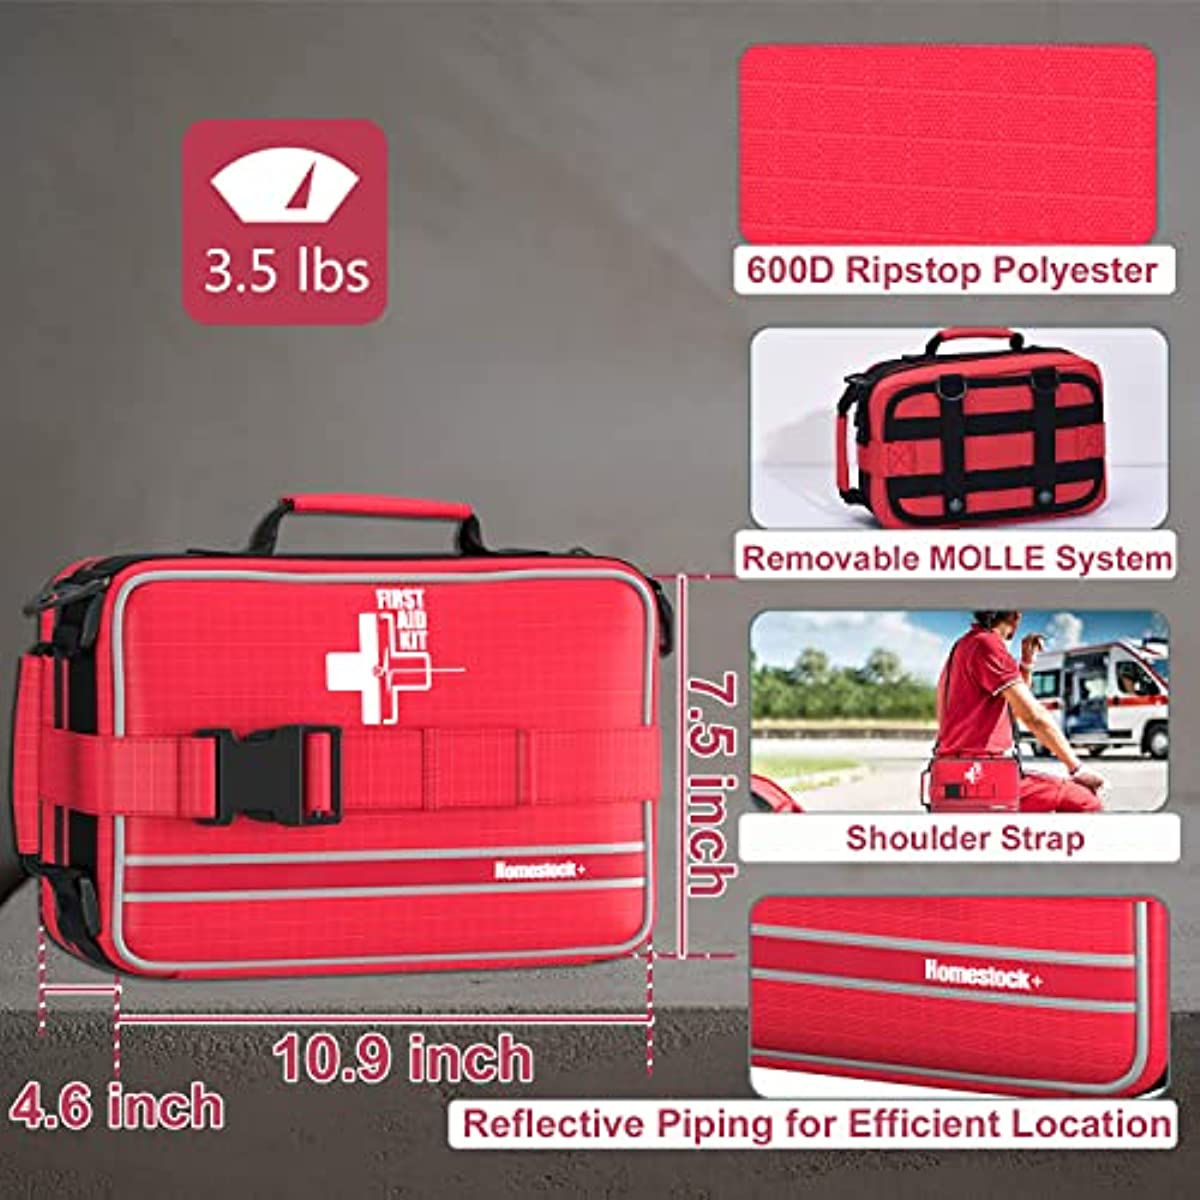 【2022 Upgrade】First Aid Kit with Tourniquet, Comprehensive Trauma First Aid Kits with Labelled Compartments for Cars, Home, Office, Backpacking, Camping, Traveling, and Cycling - 230 Piece